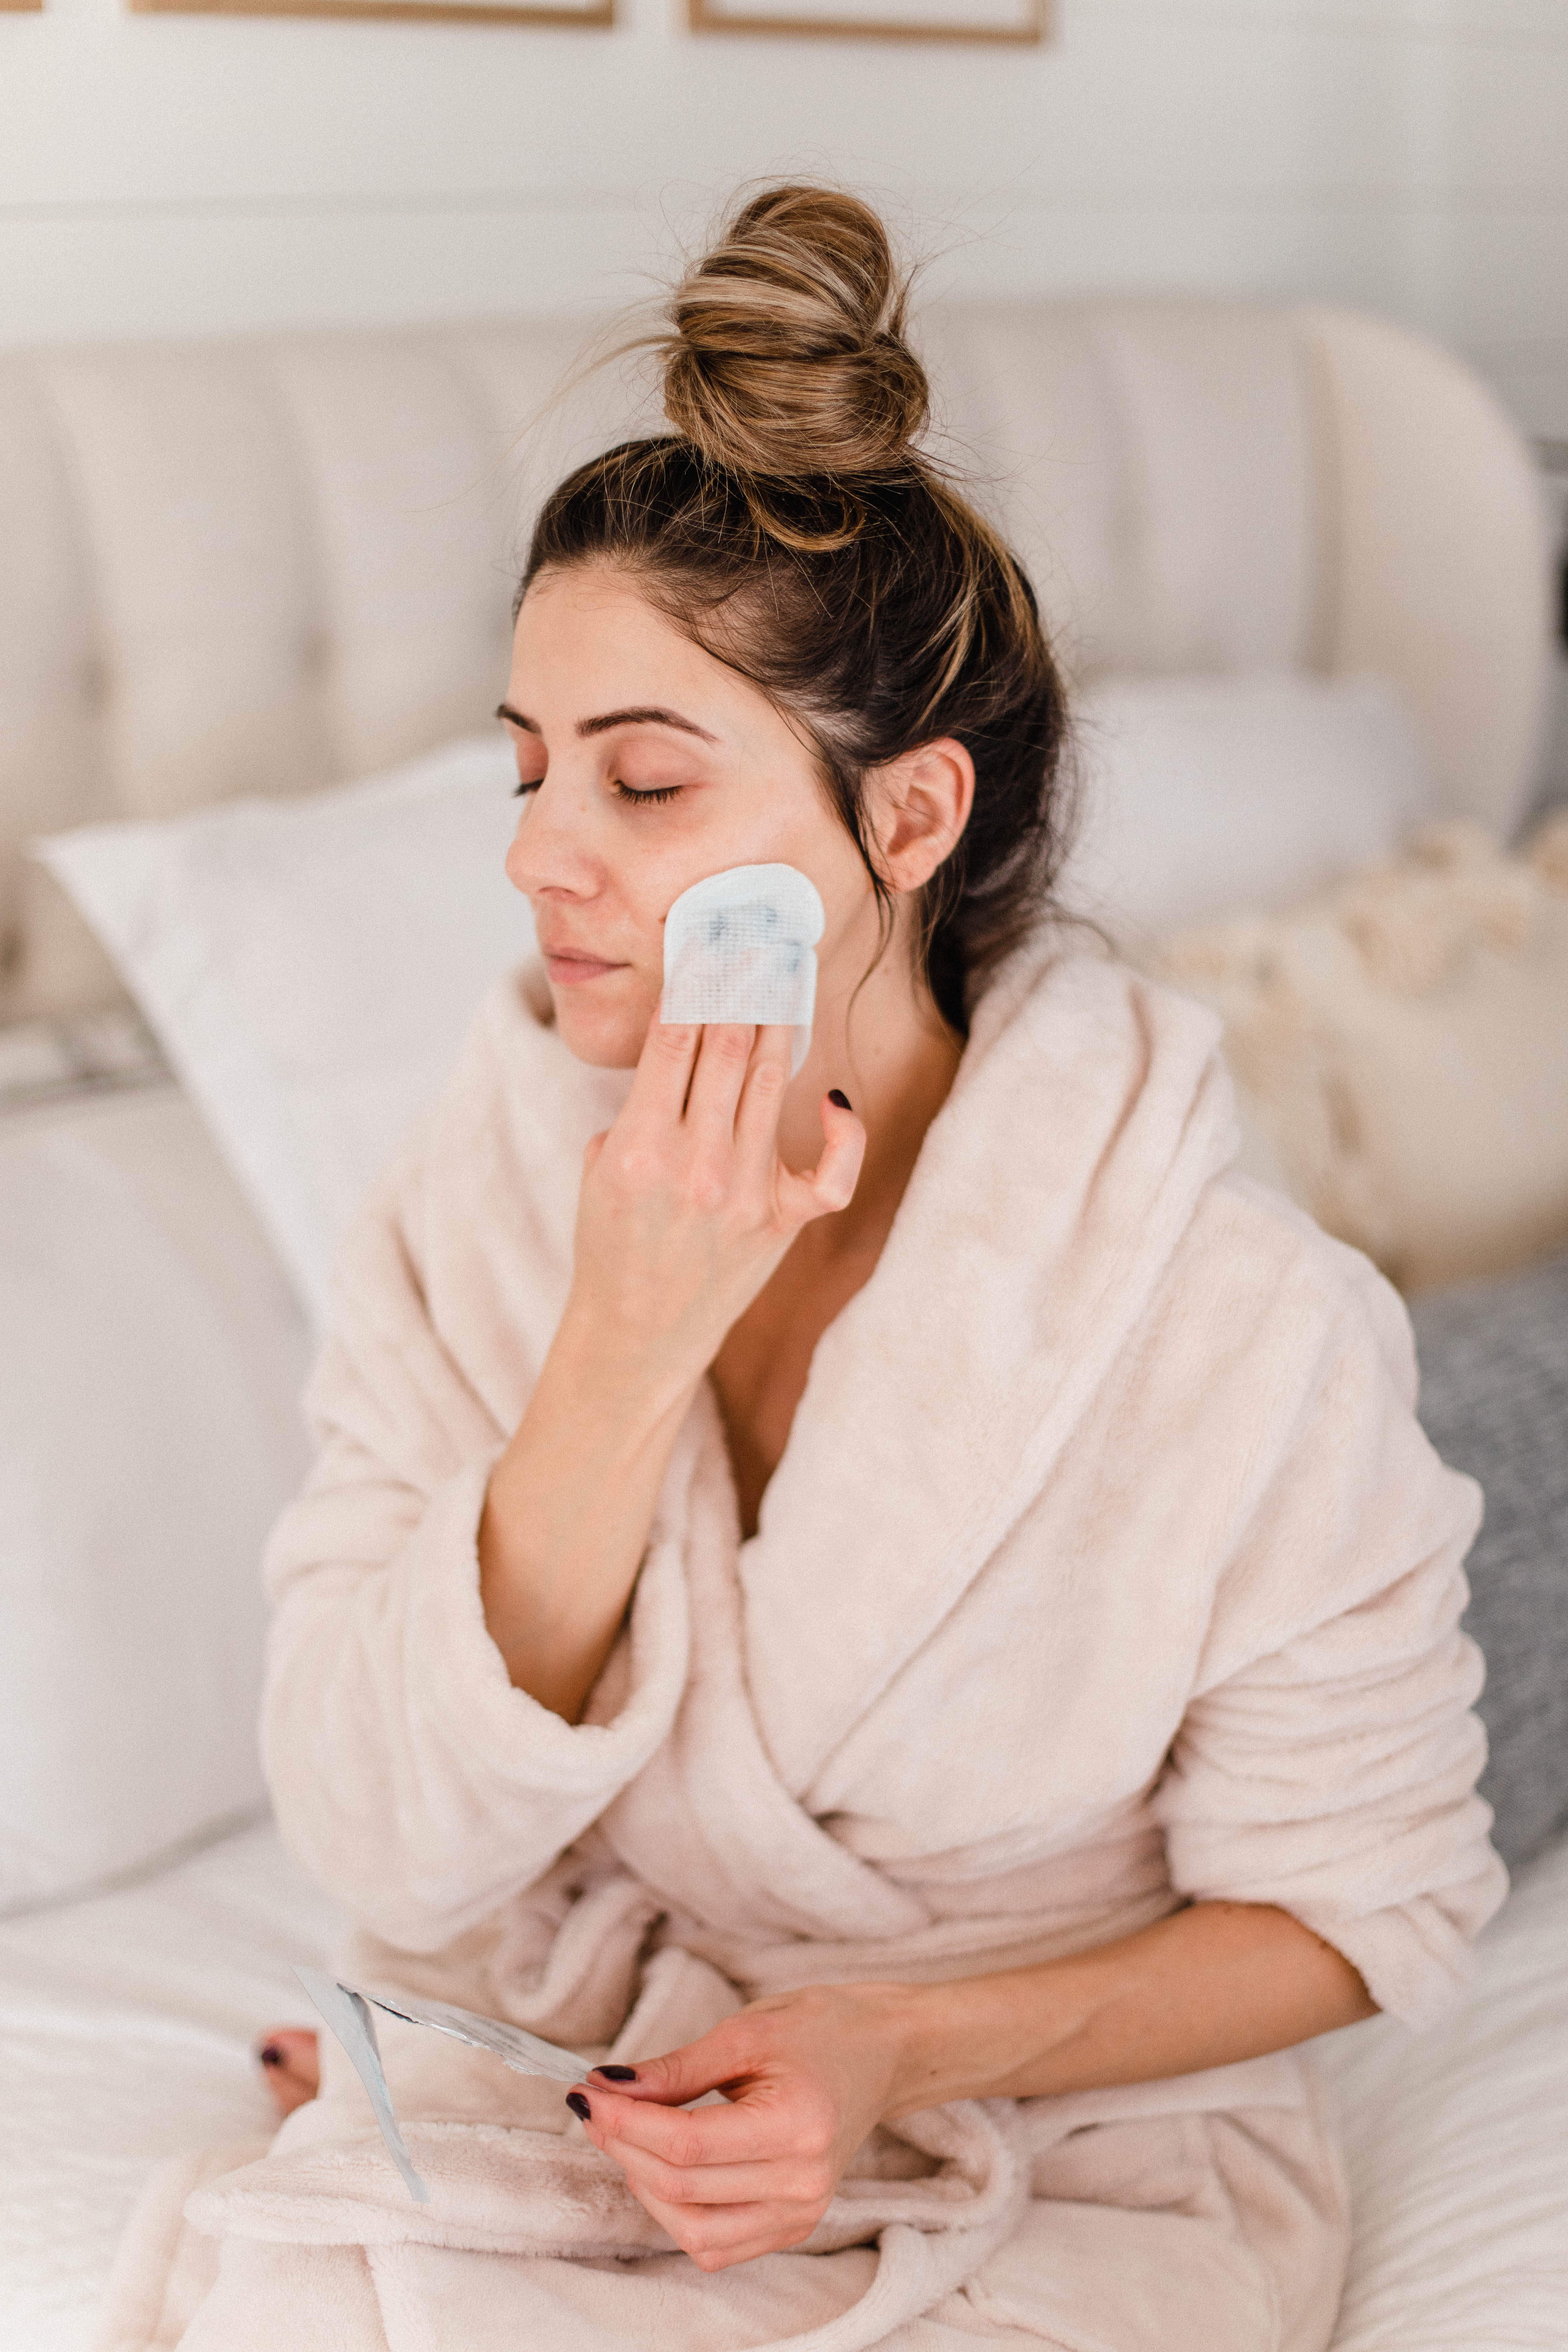 Connecticut life and style blogger Lauren McBride shares her favorite TULA skincare products, and includes an exclusive 20% off coupon code.